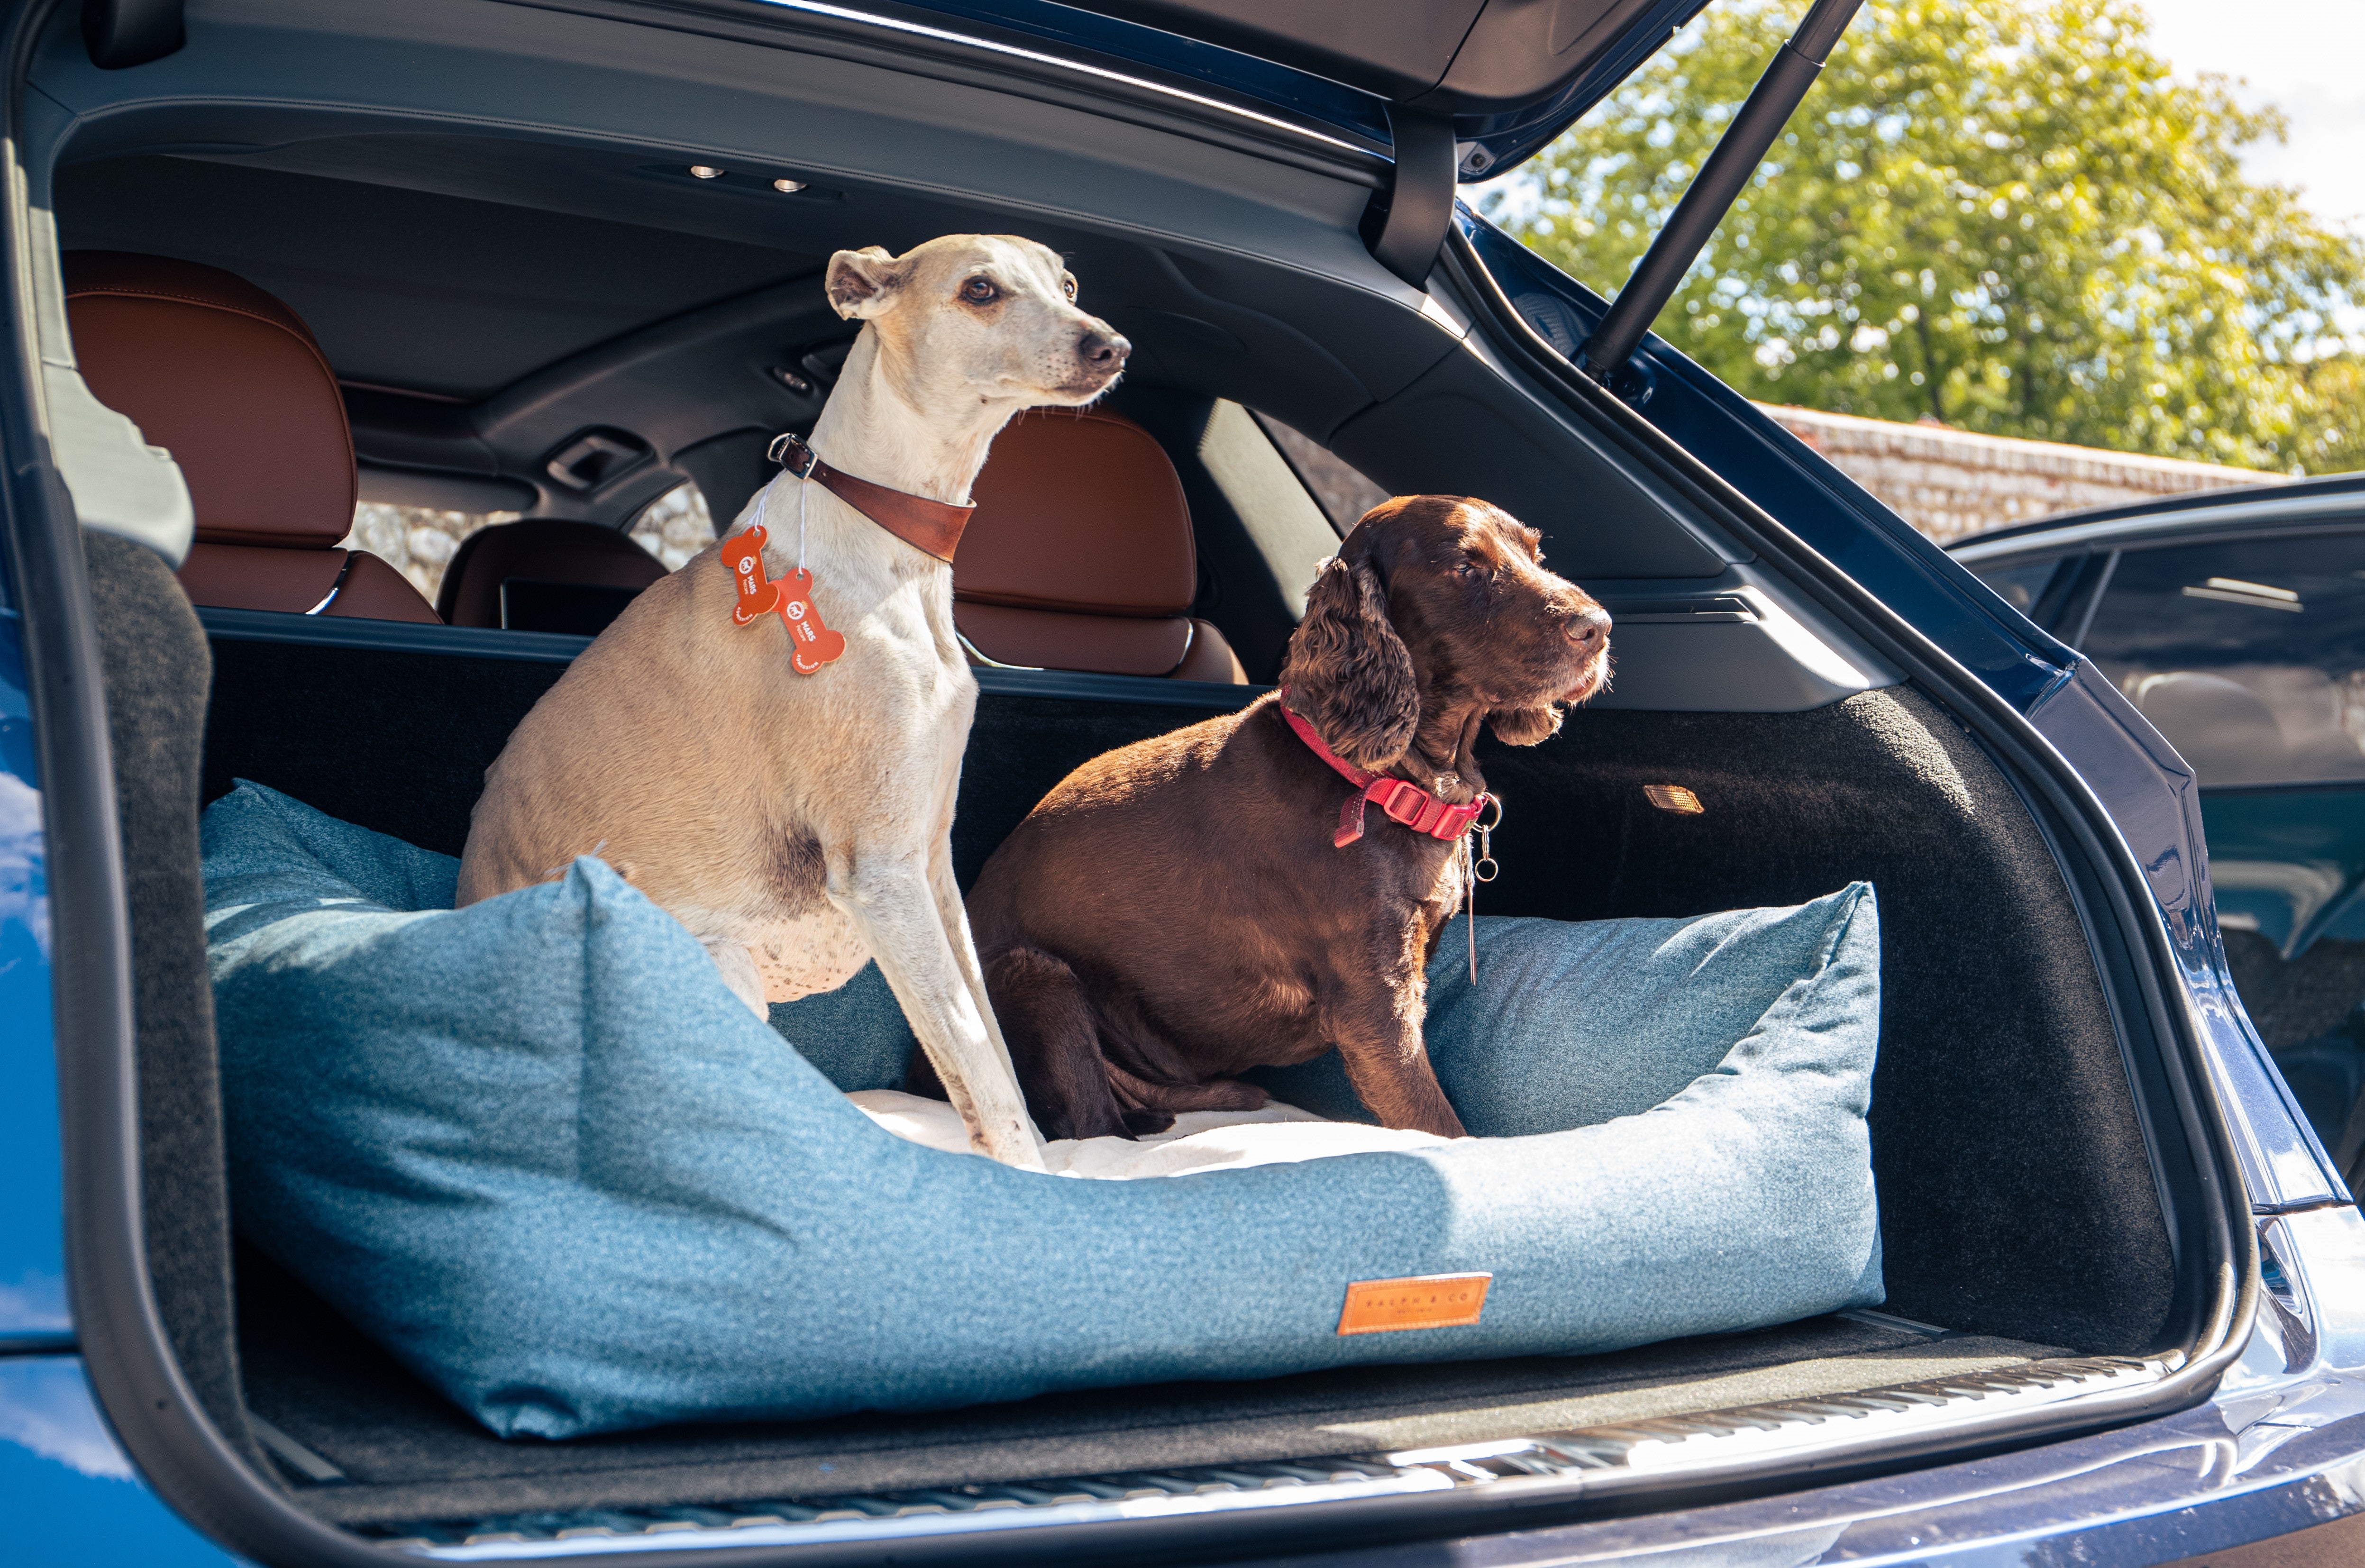 Choosing the right dog bed for travelling with your dog